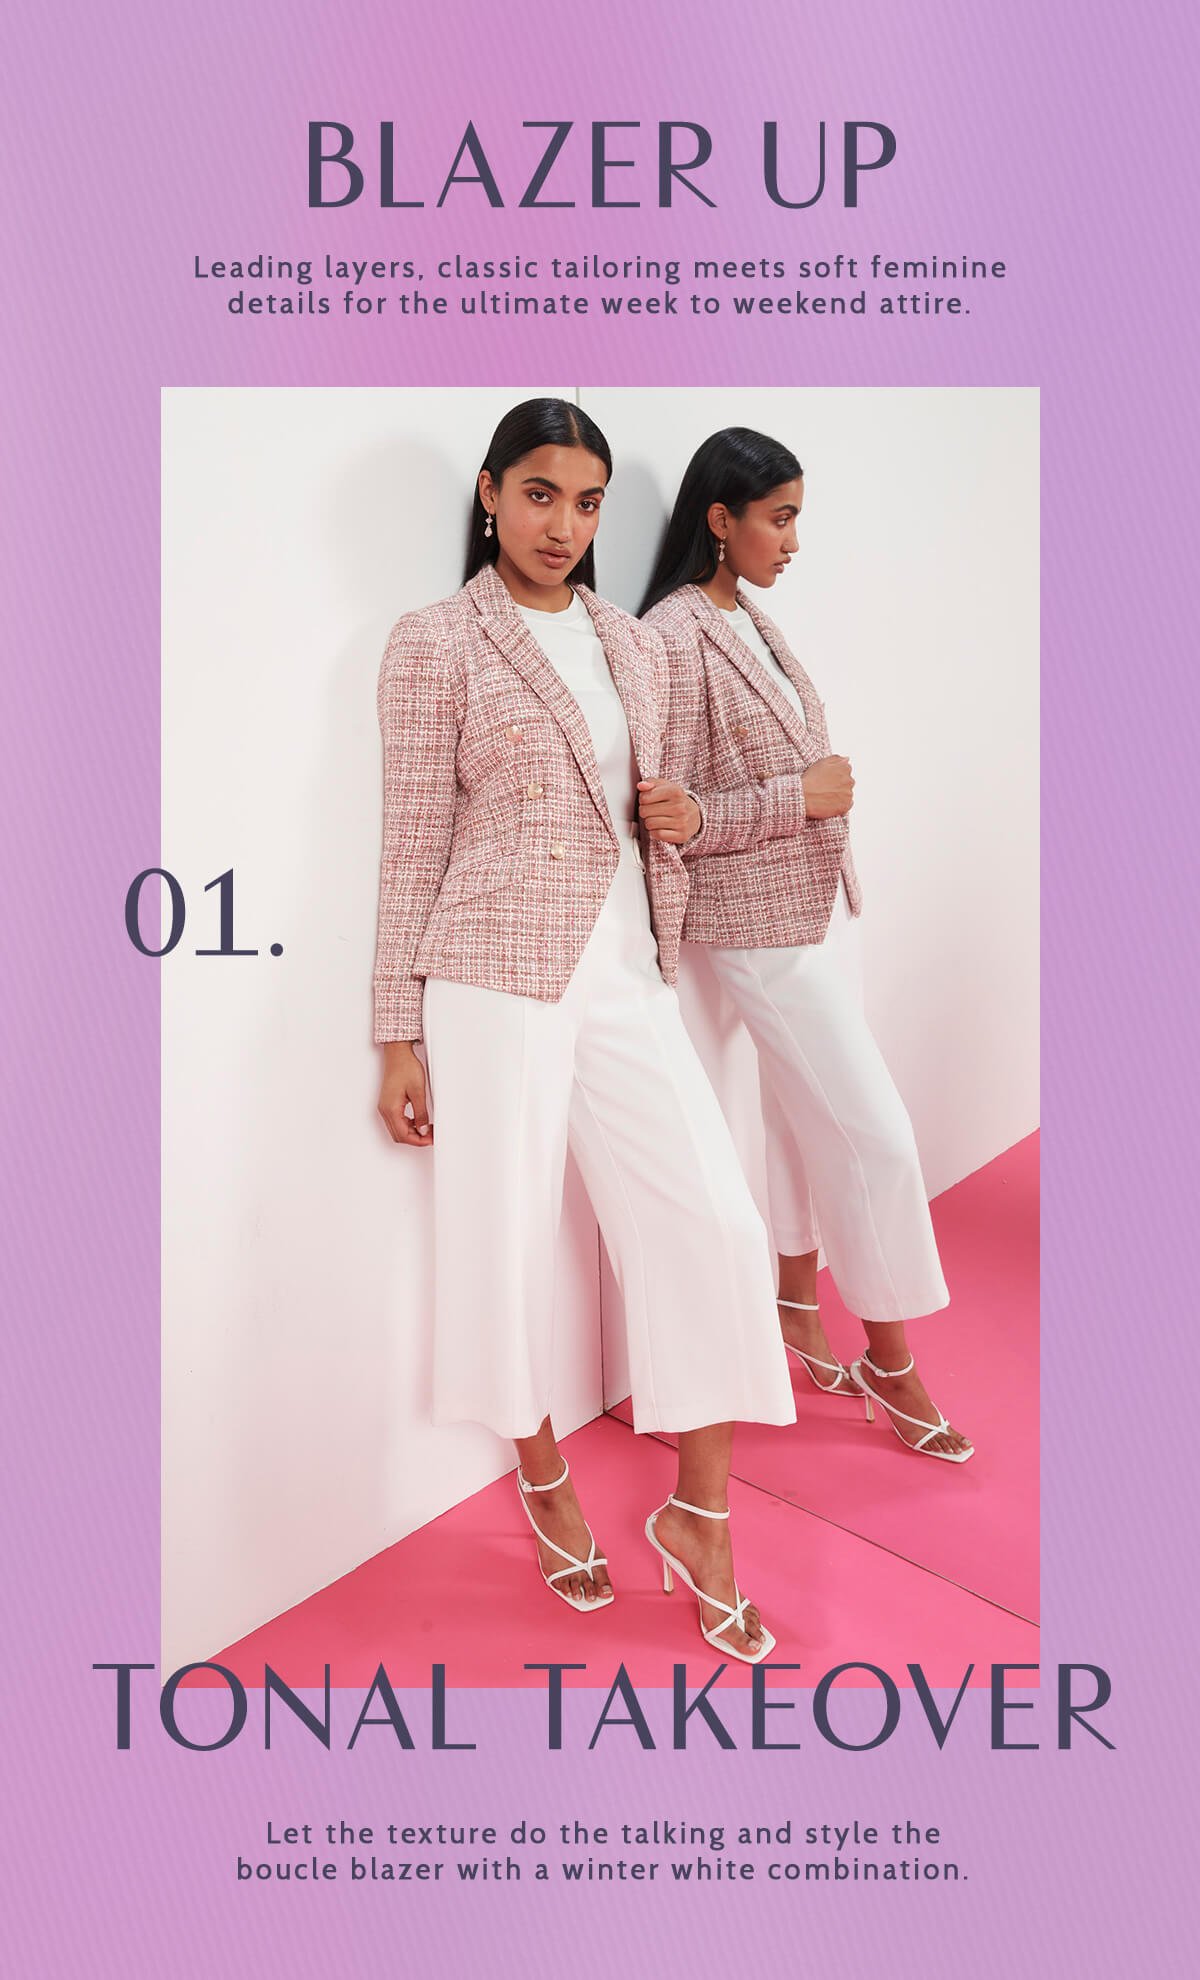 Blazer Up. Leading layers, classic tailoring meets soft feminine details for the ultimate week to weekend attire. 01. Tonal Takeover. Let the texture do the talking and style the boucle blazer with a winter white combination. 